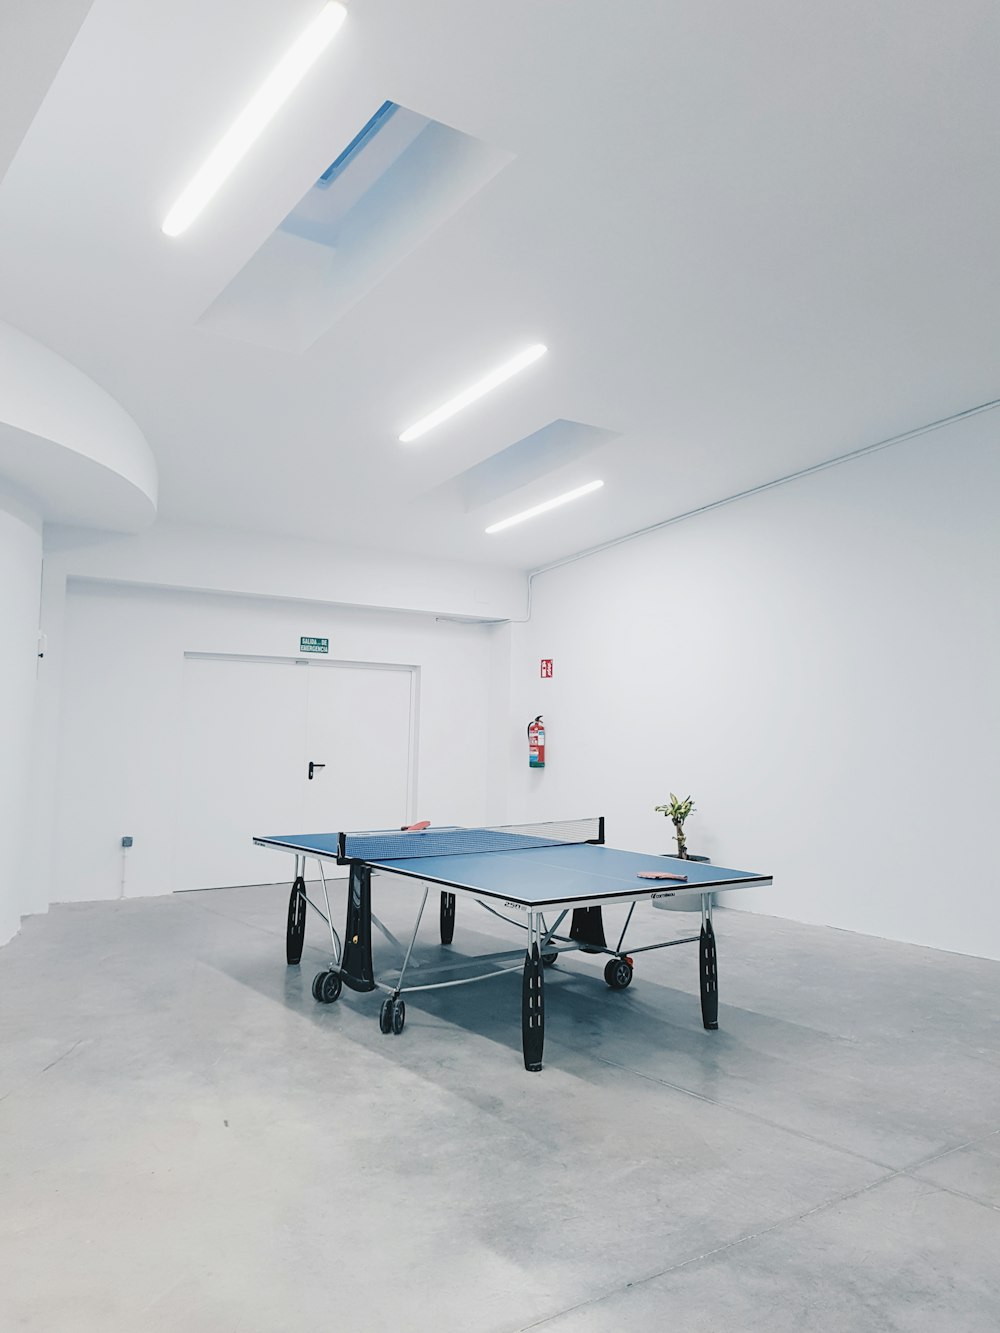 photography of blue table tennis inside a room